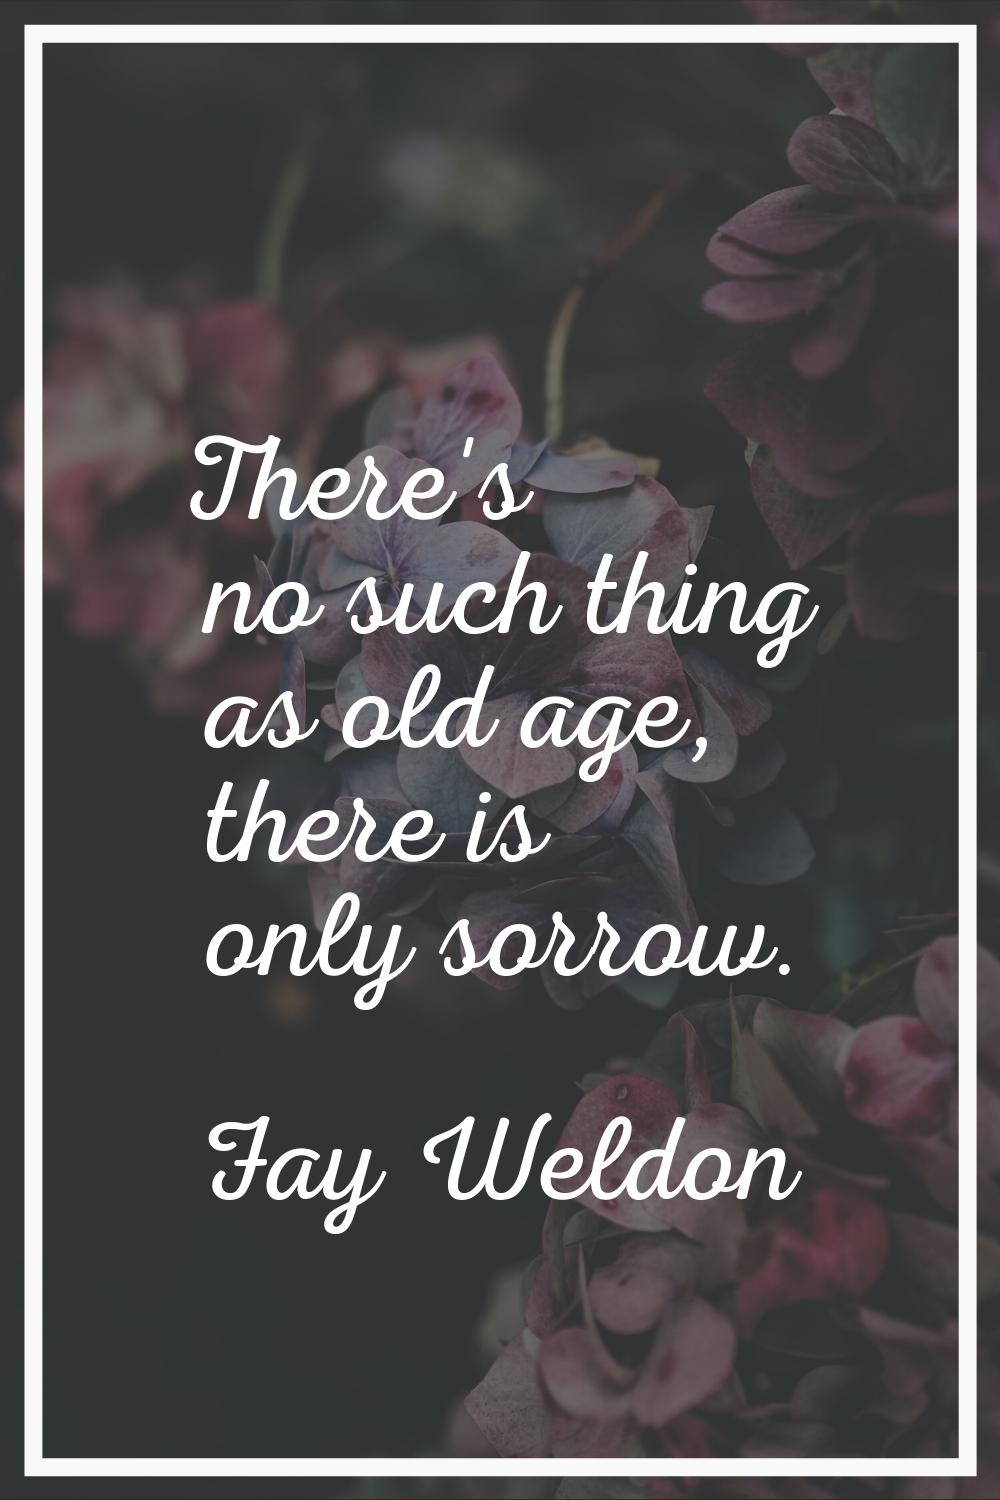 There's no such thing as old age, there is only sorrow.